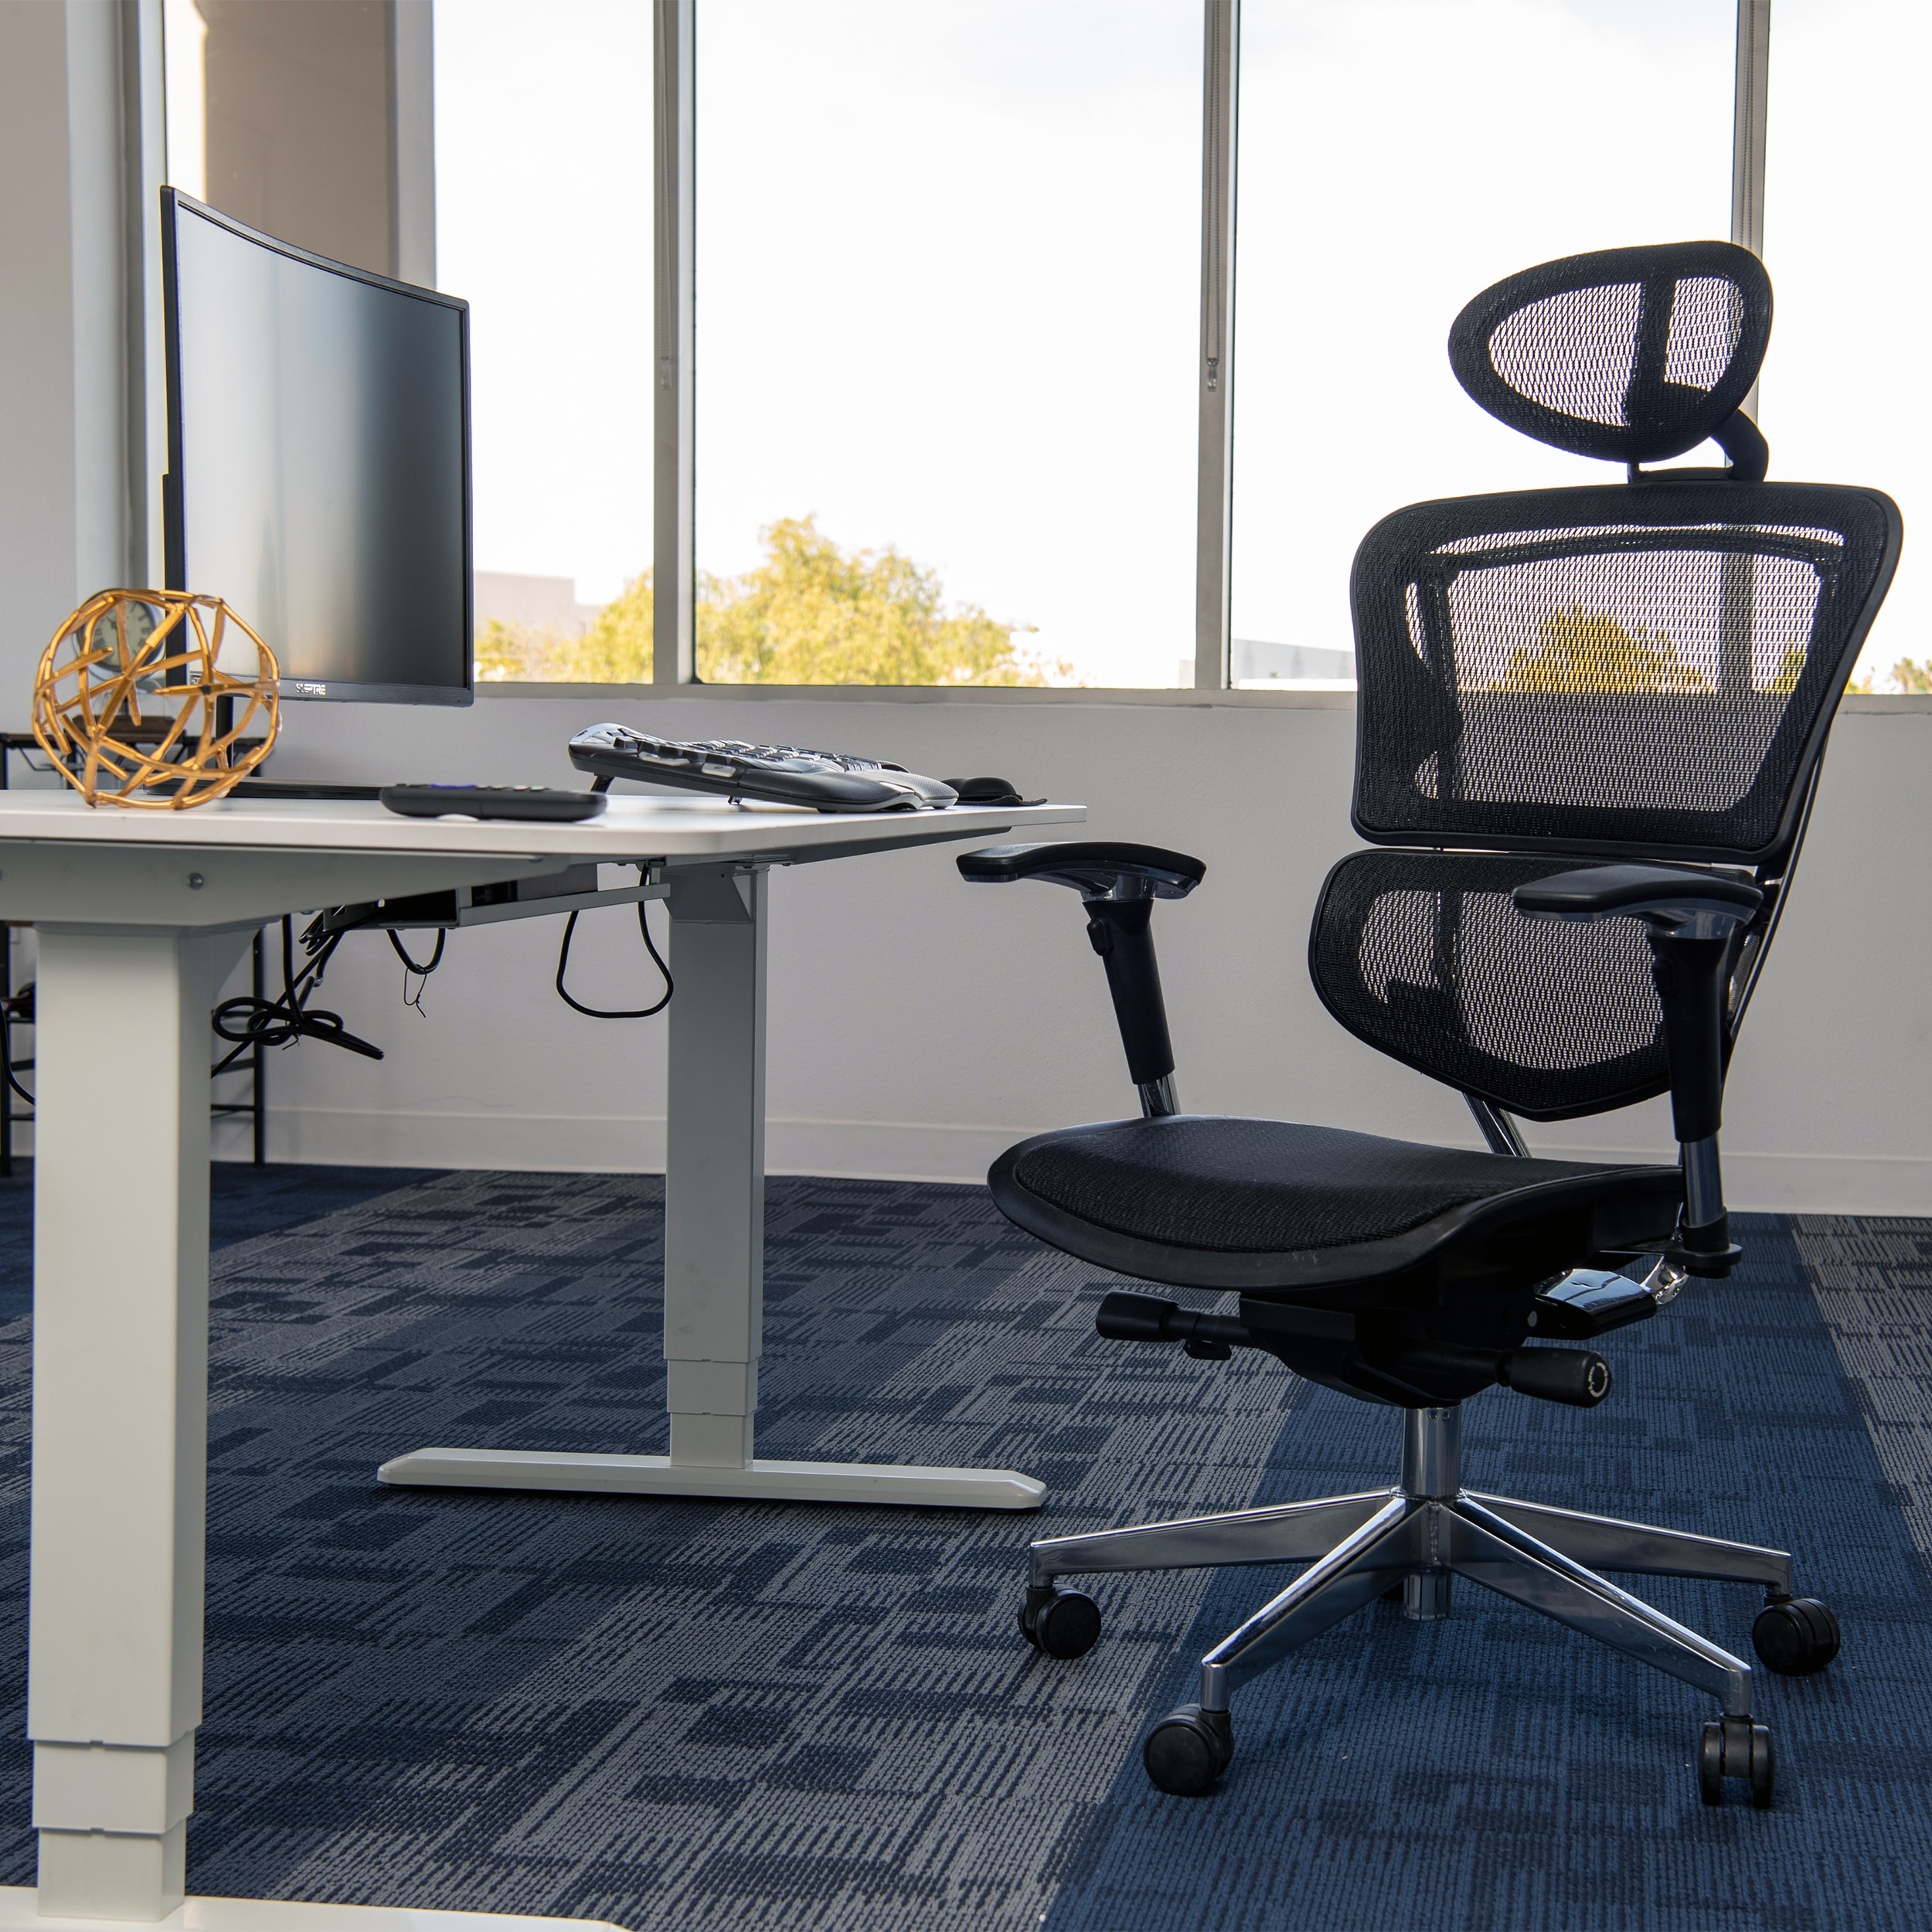 https://ak1.ostkcdn.com/images/products/is/images/direct/b09f728b64caa29533106f0f3c7d0eb327c6d16d/ErgoMax-Ergonomic-Black-Mesh-Adjustable-Executive-Office-Swivel-Chair-w--High-Back%2C-Headrest%2C-52%22-Max-Height.jpg